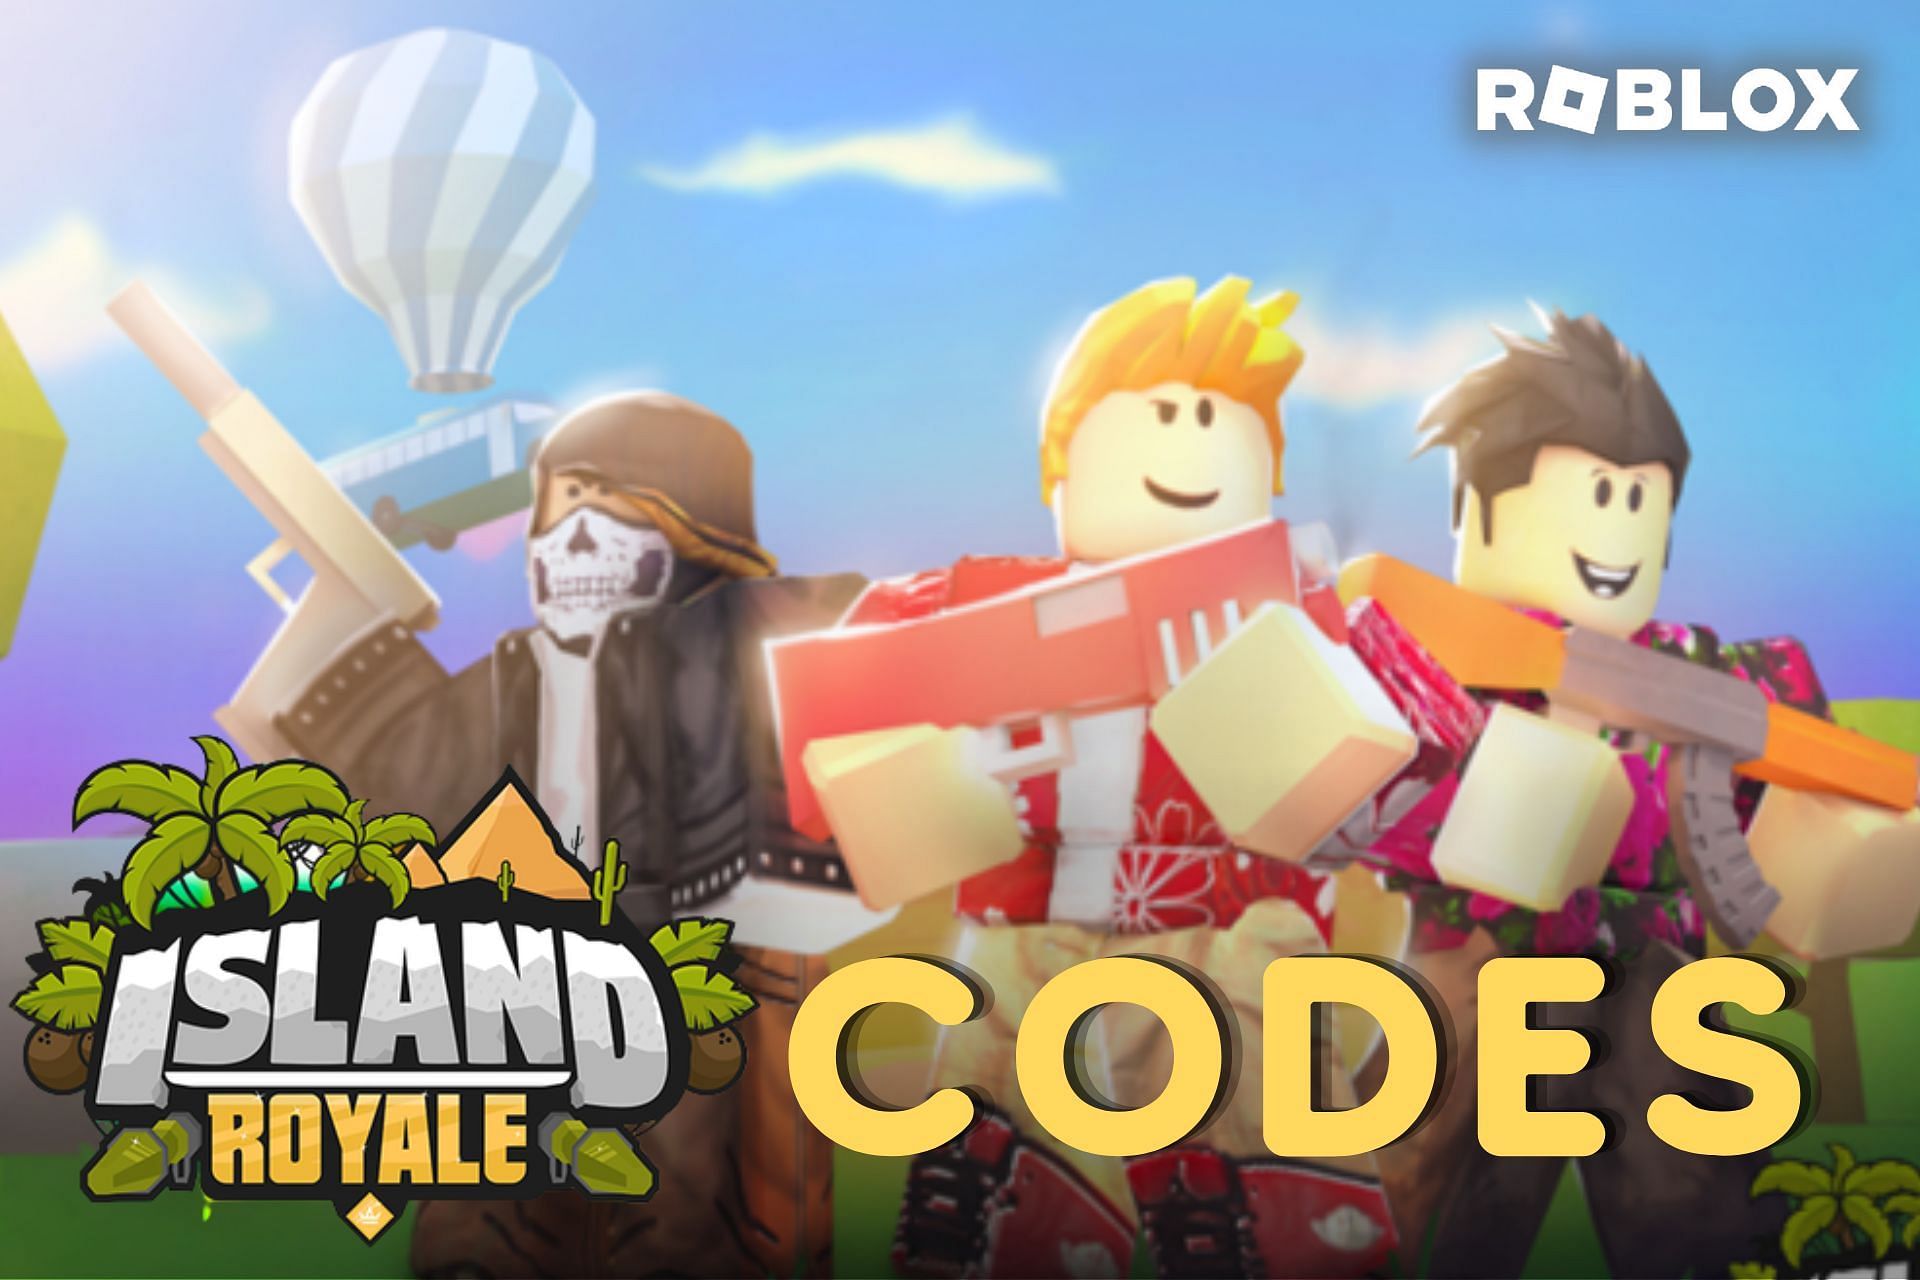 Roblox avatars in the game 